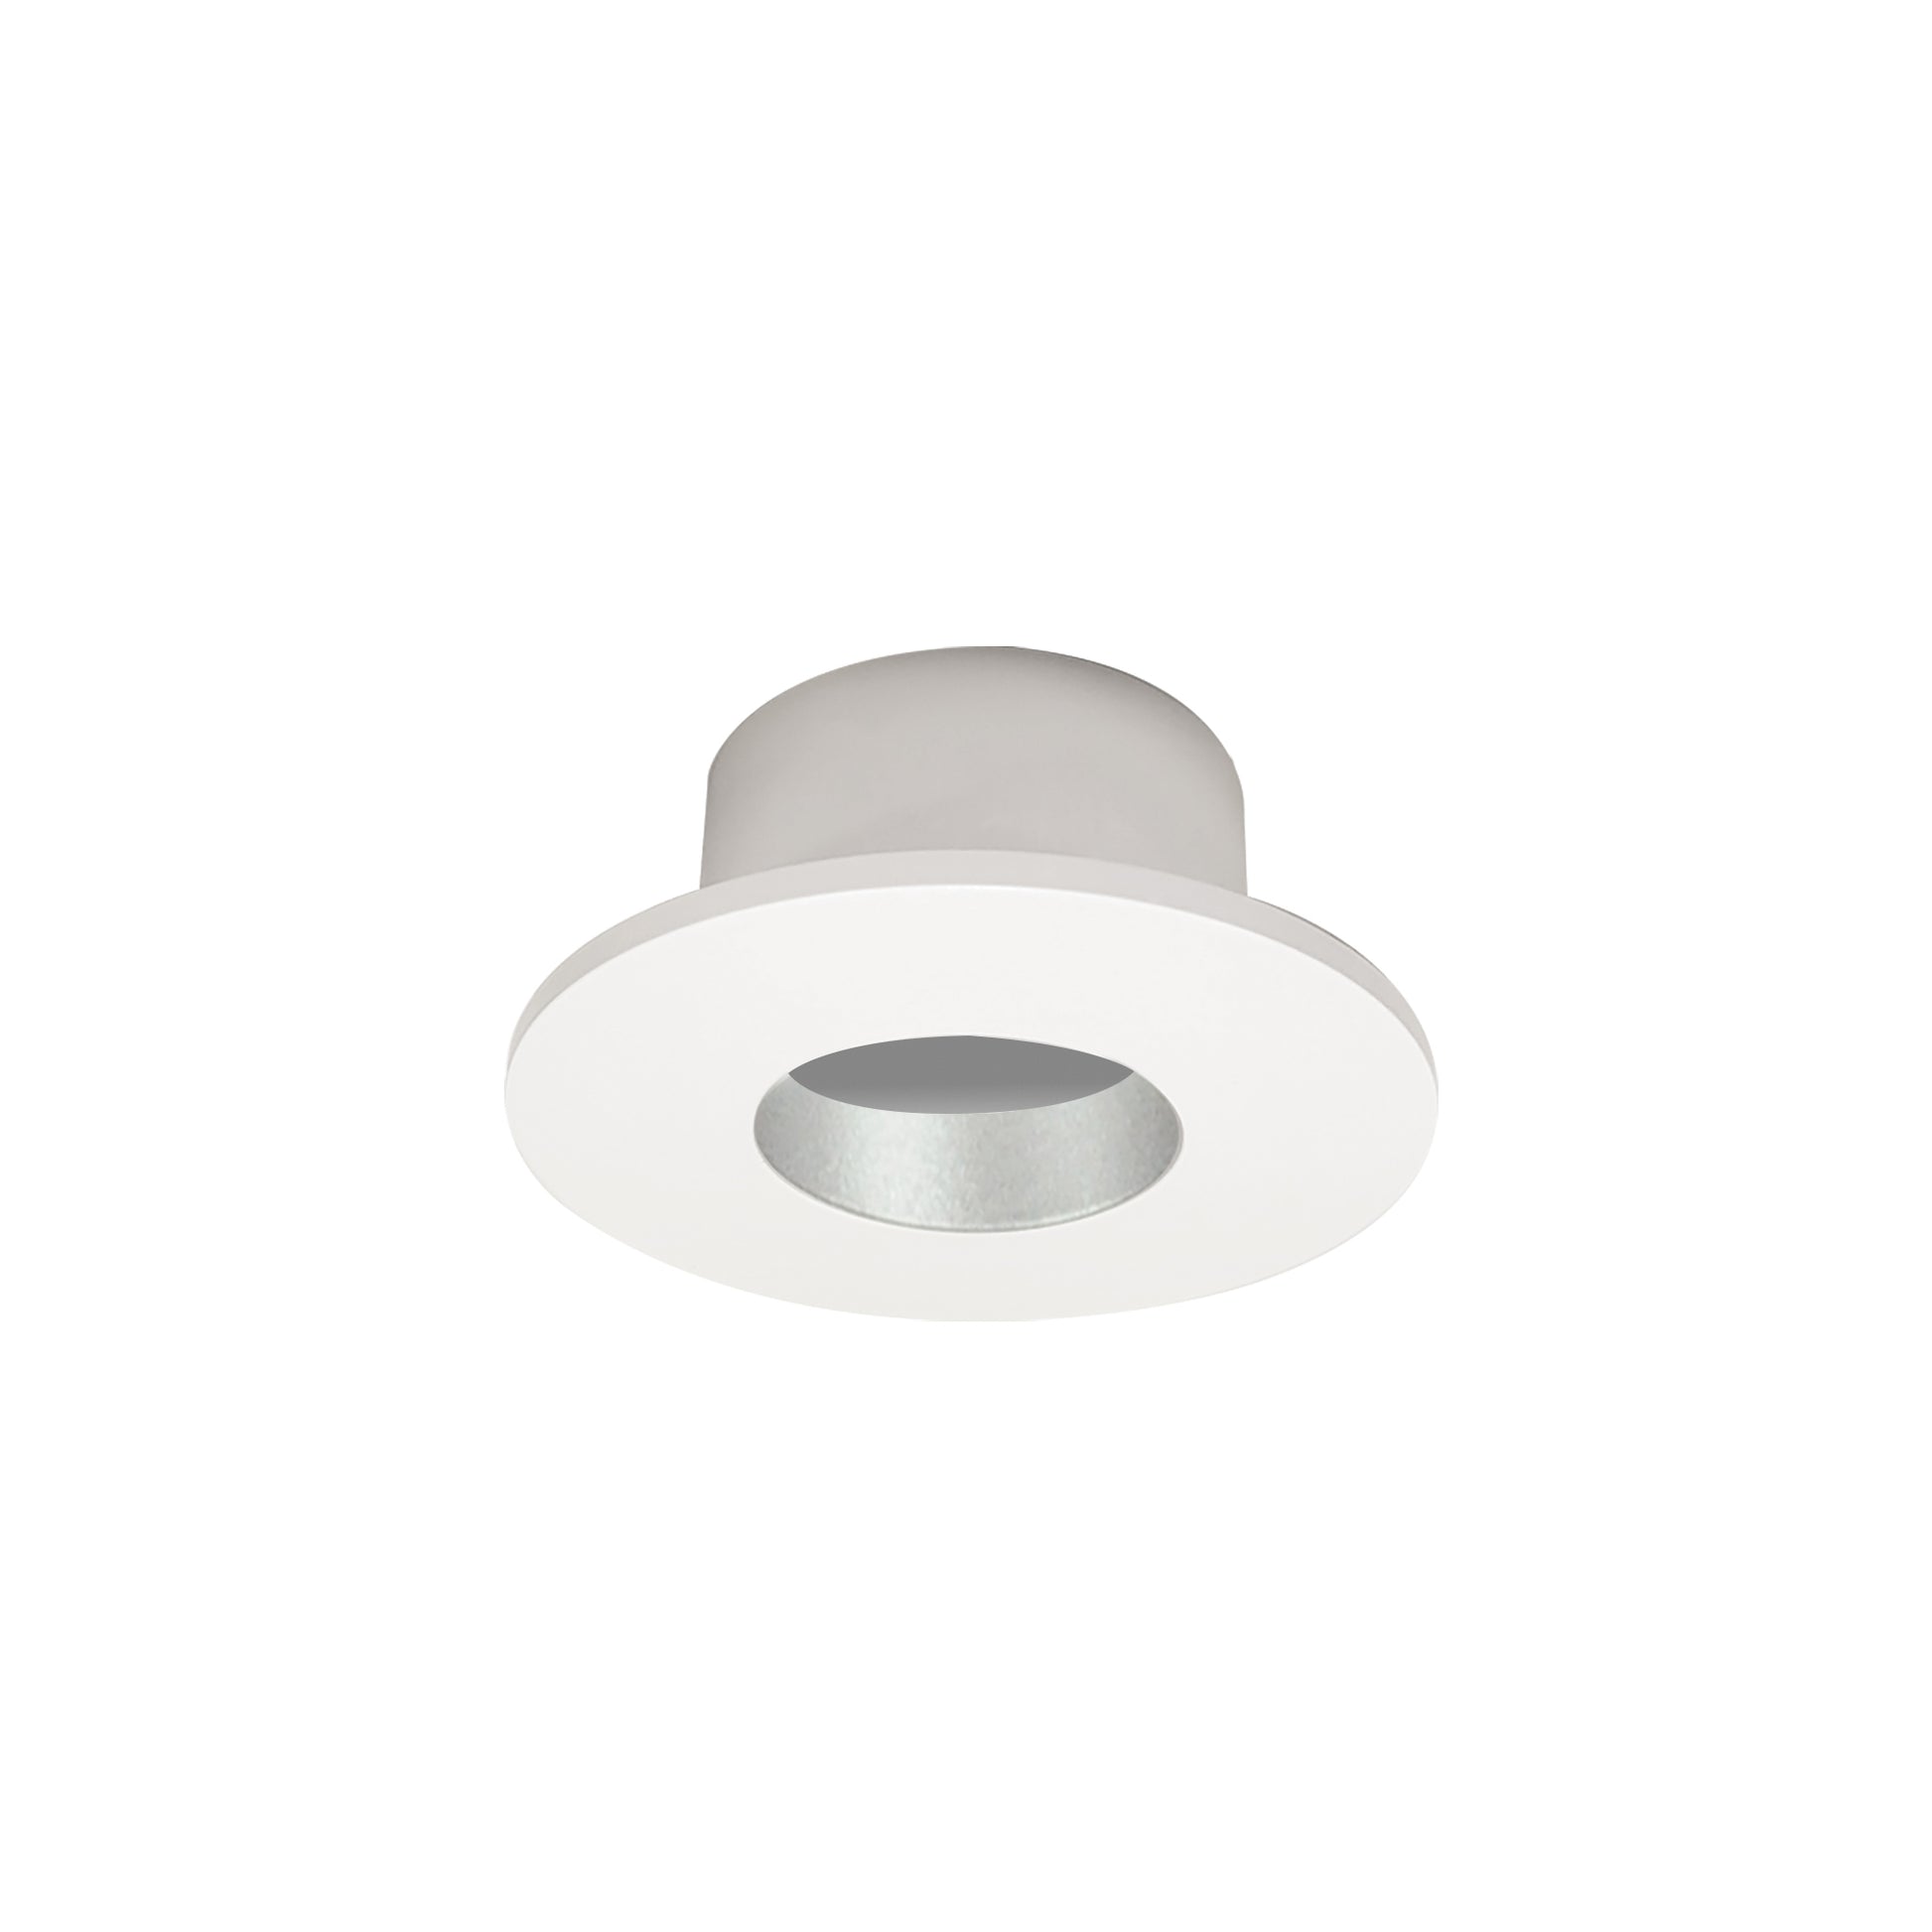 1-Inch Nora Lighting Iolite LED Recessed Downlight Trim -  Can-less Round Fixture 2